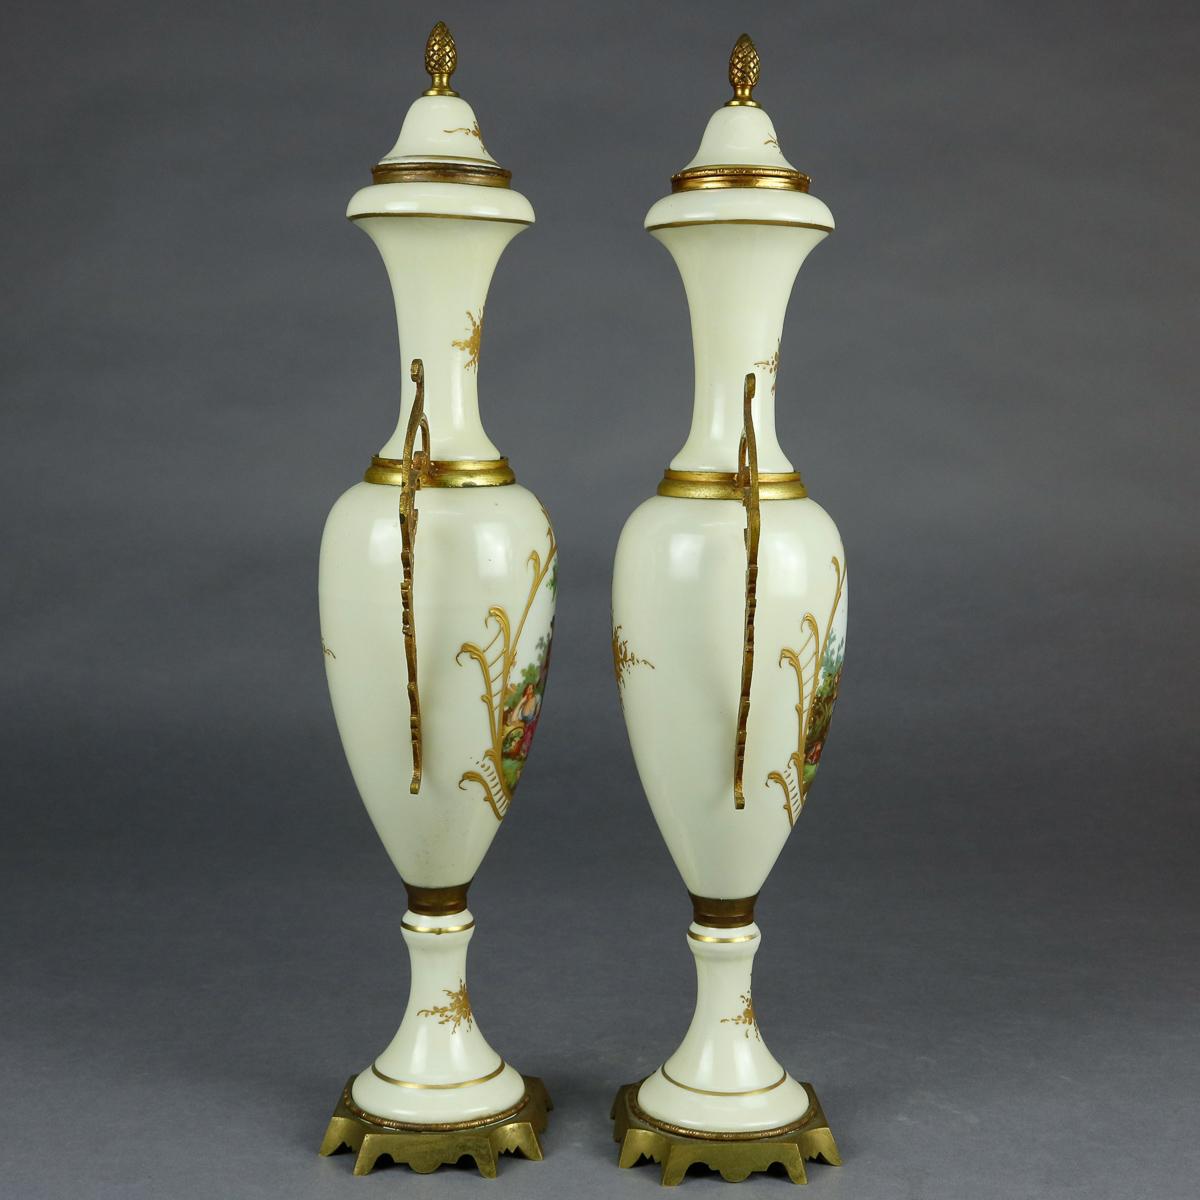 19th Century Antique French Sevres Pictorial Hand Painted and Gilt Porcelain and Bronze Urns